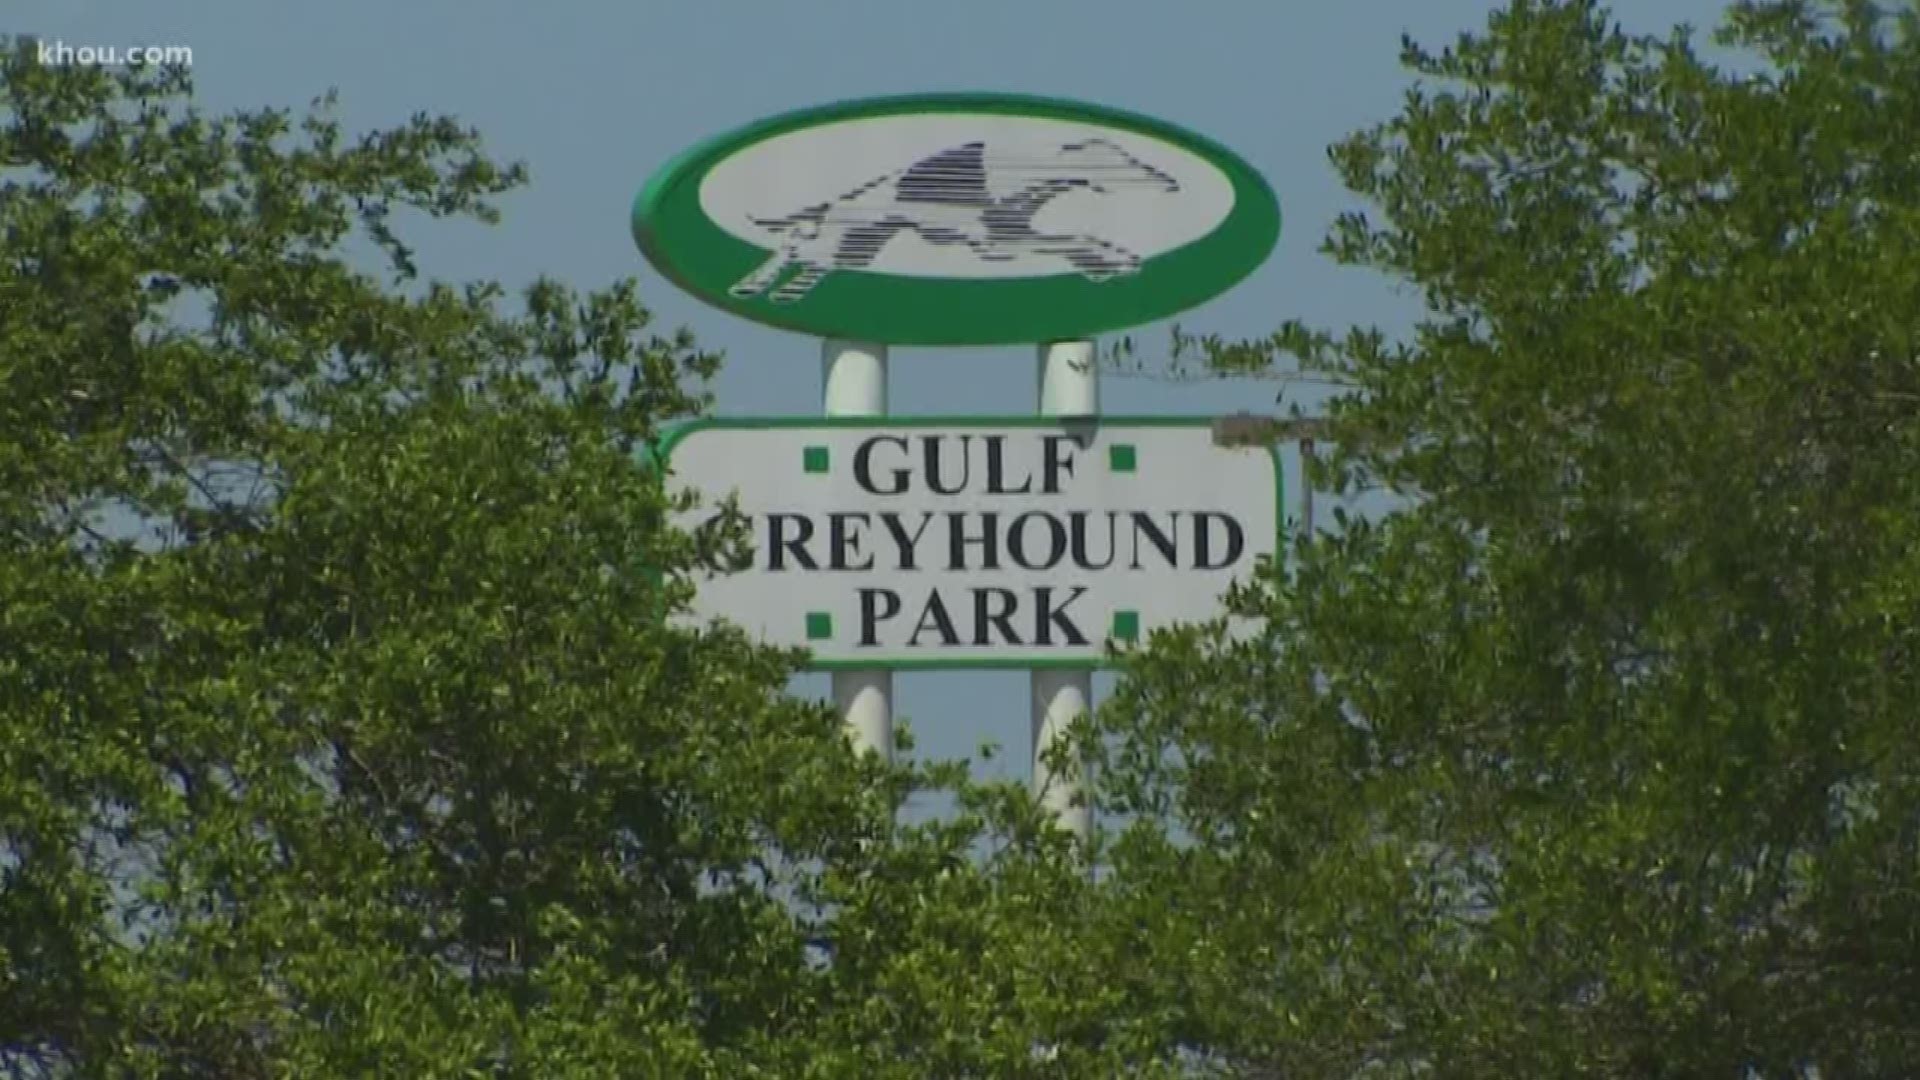 Animal advocates are calling for an investigation into Gulf Greyhound Park in La Marque after discovering injury reports from the track’s 9-week 2018-2019 season.